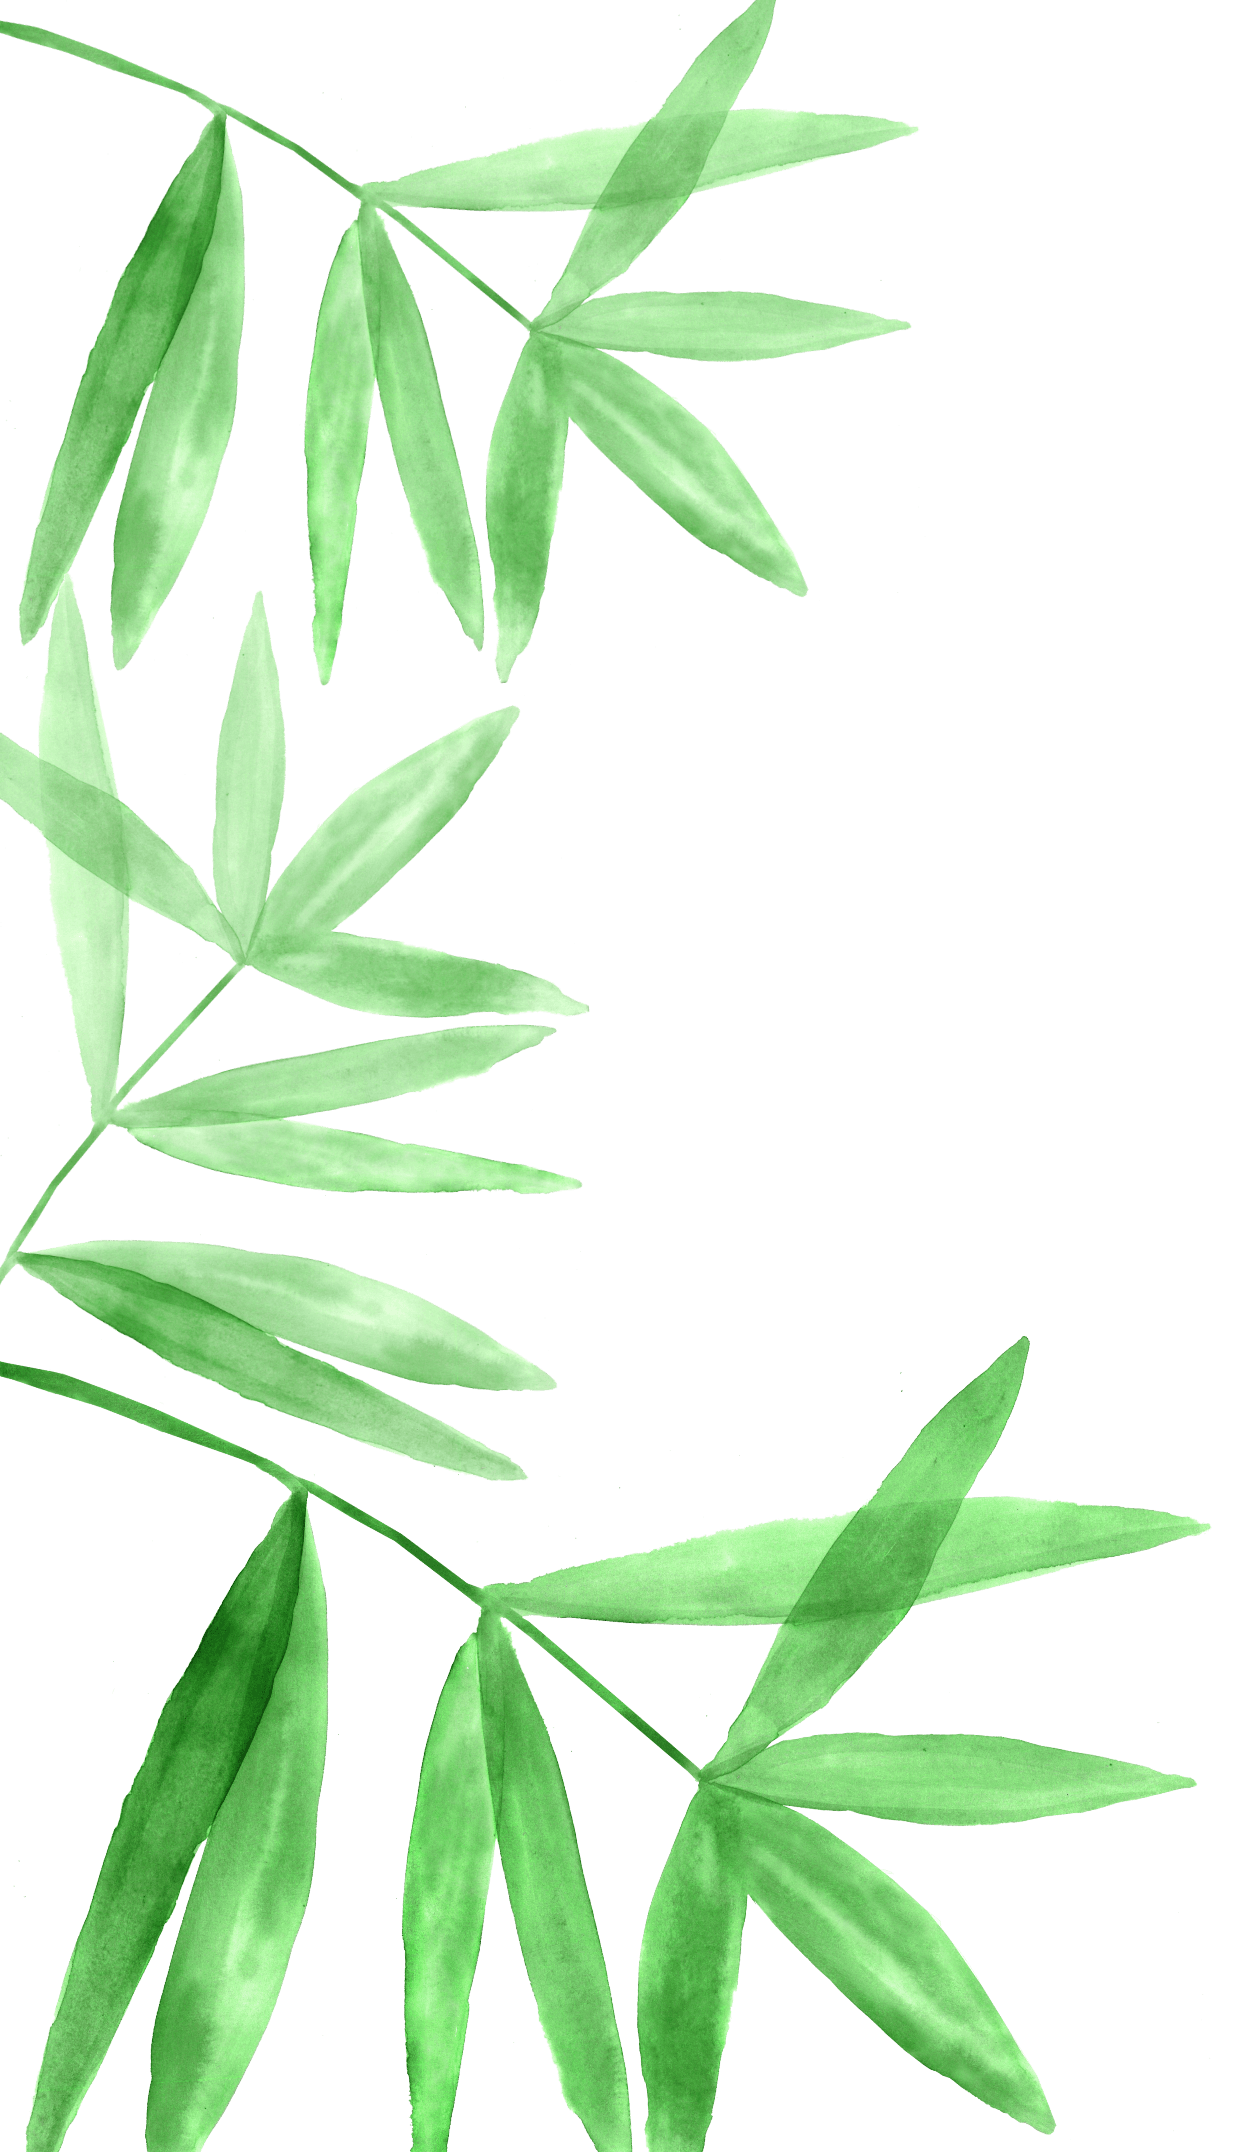 Watercolor illustration of leaves along the left side